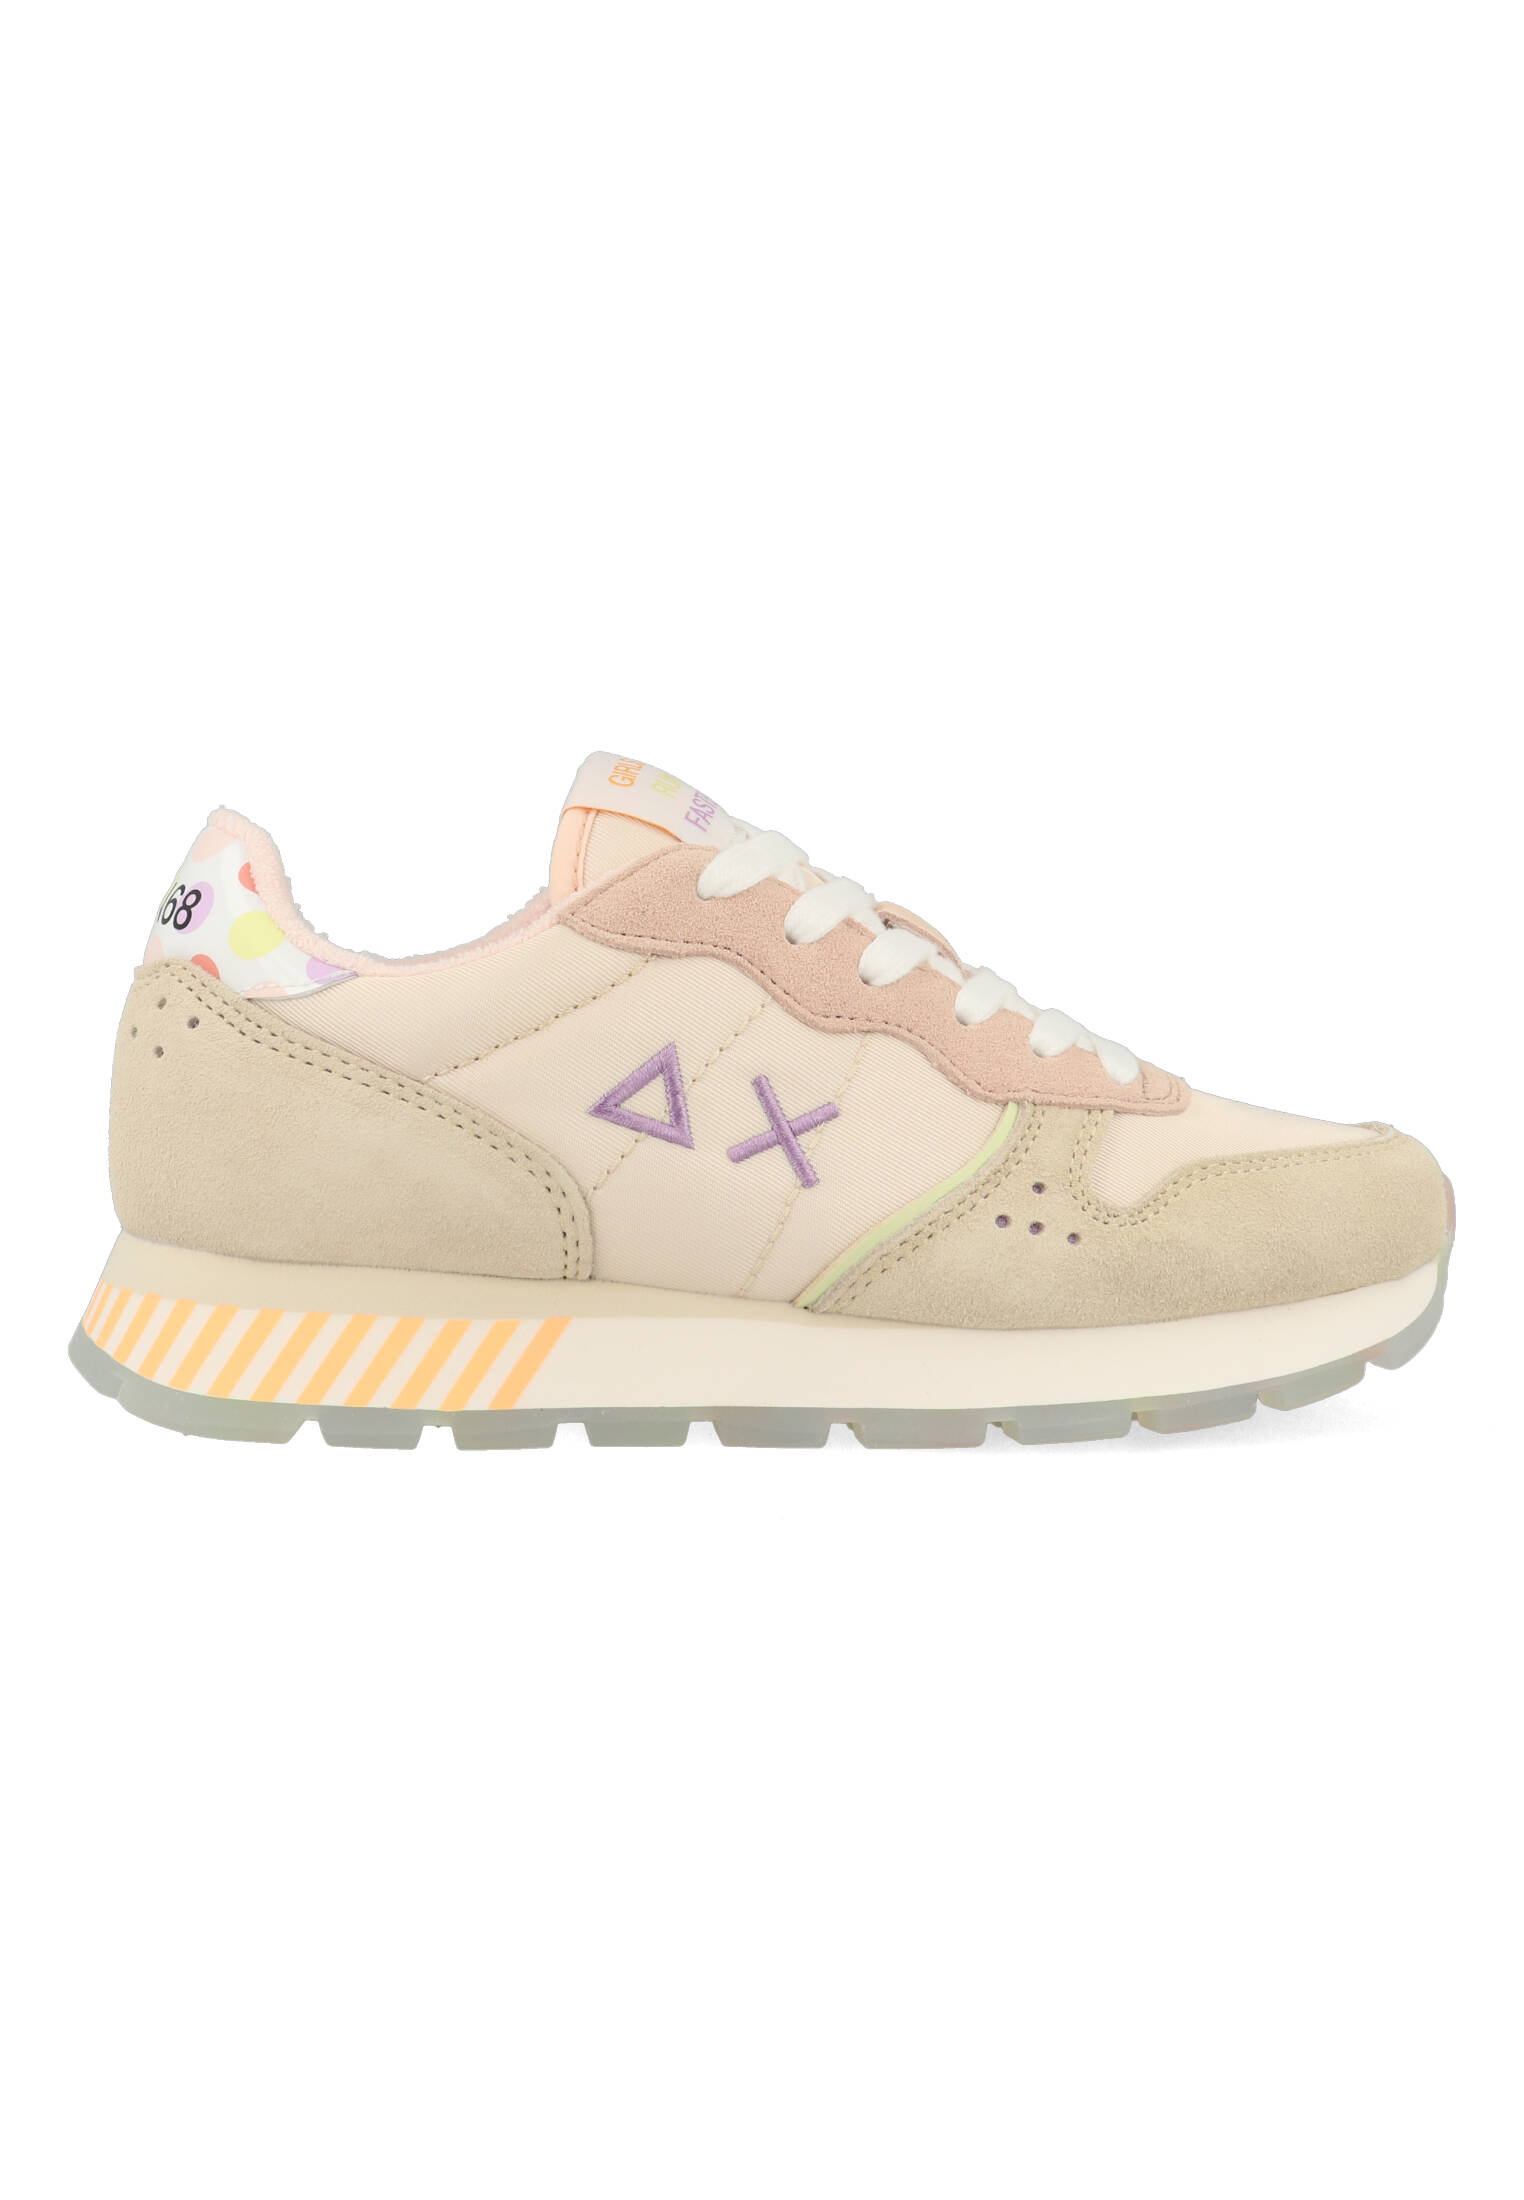 Sun68 Ally Candy Cane Z34205_31 Beige-37 maat 37